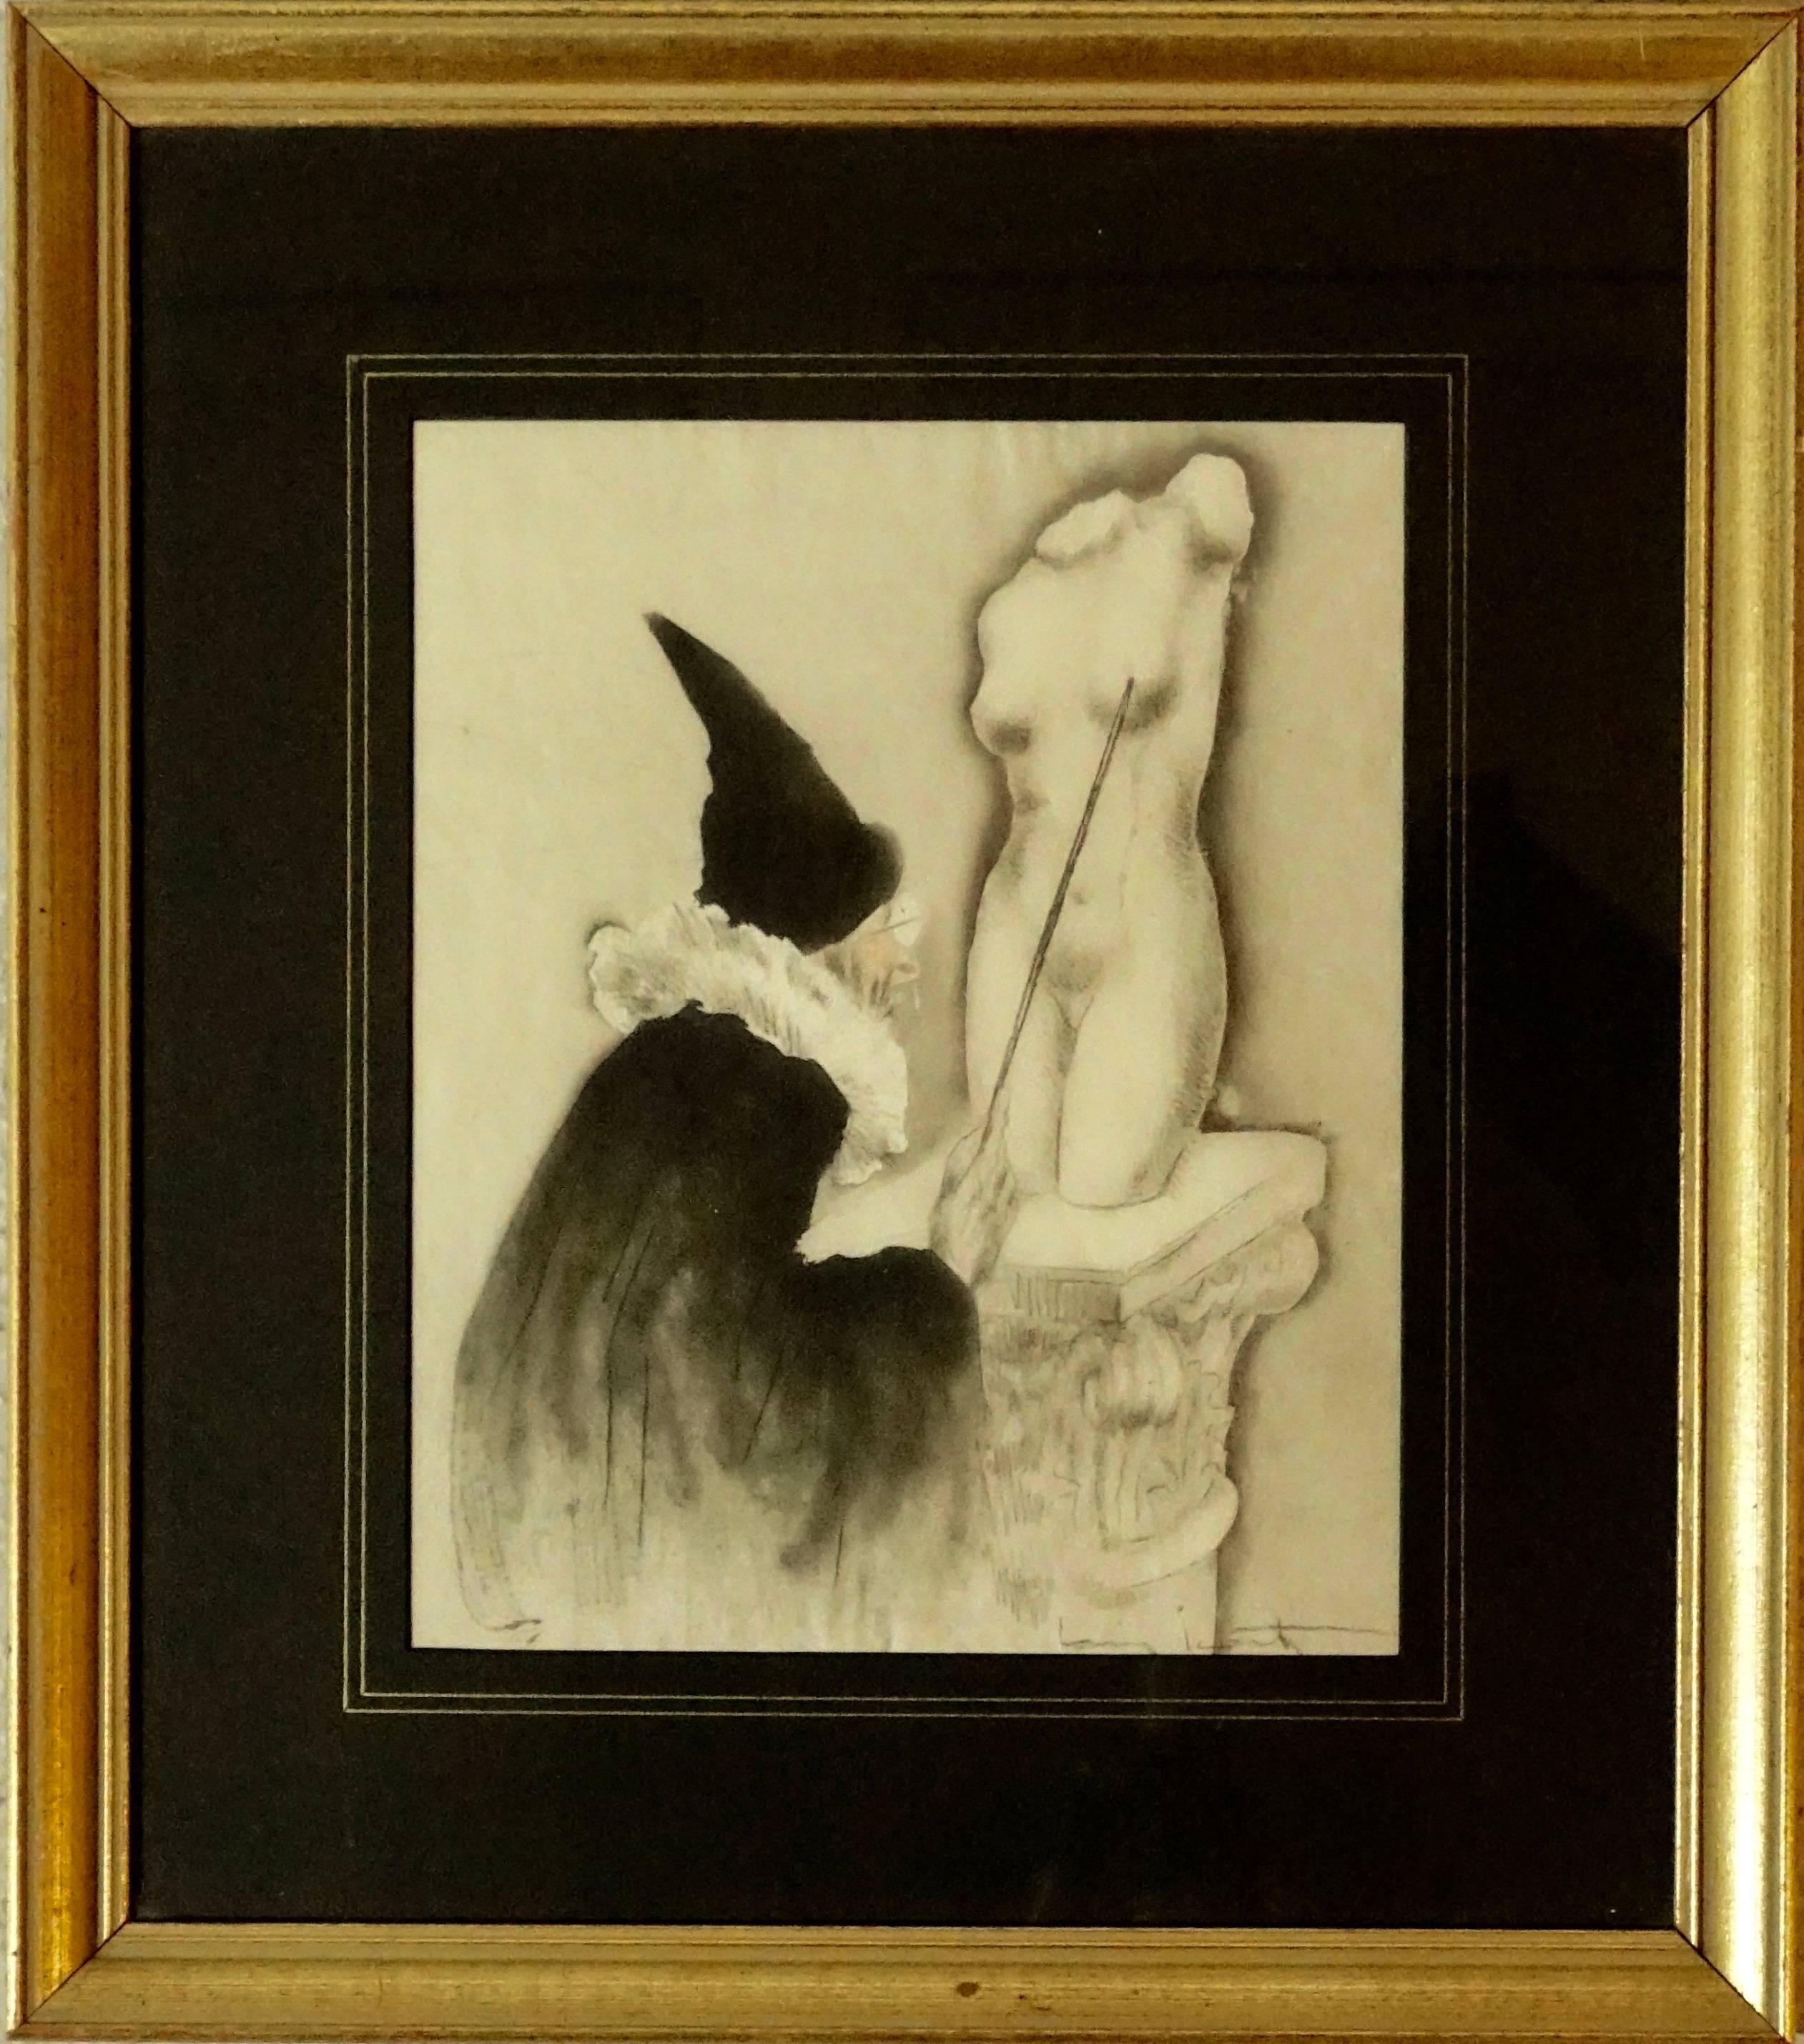 Louis Icart (French, 1888-1950)
“The professor”
La Vie Des Seins by Docteur Jacobus, 1945
Limited edition of 190
Dry point etching on arches paper
Fig. 195, Louis Icart: Erotica
Signed in print lr.

A quite whimsical scene of a professor